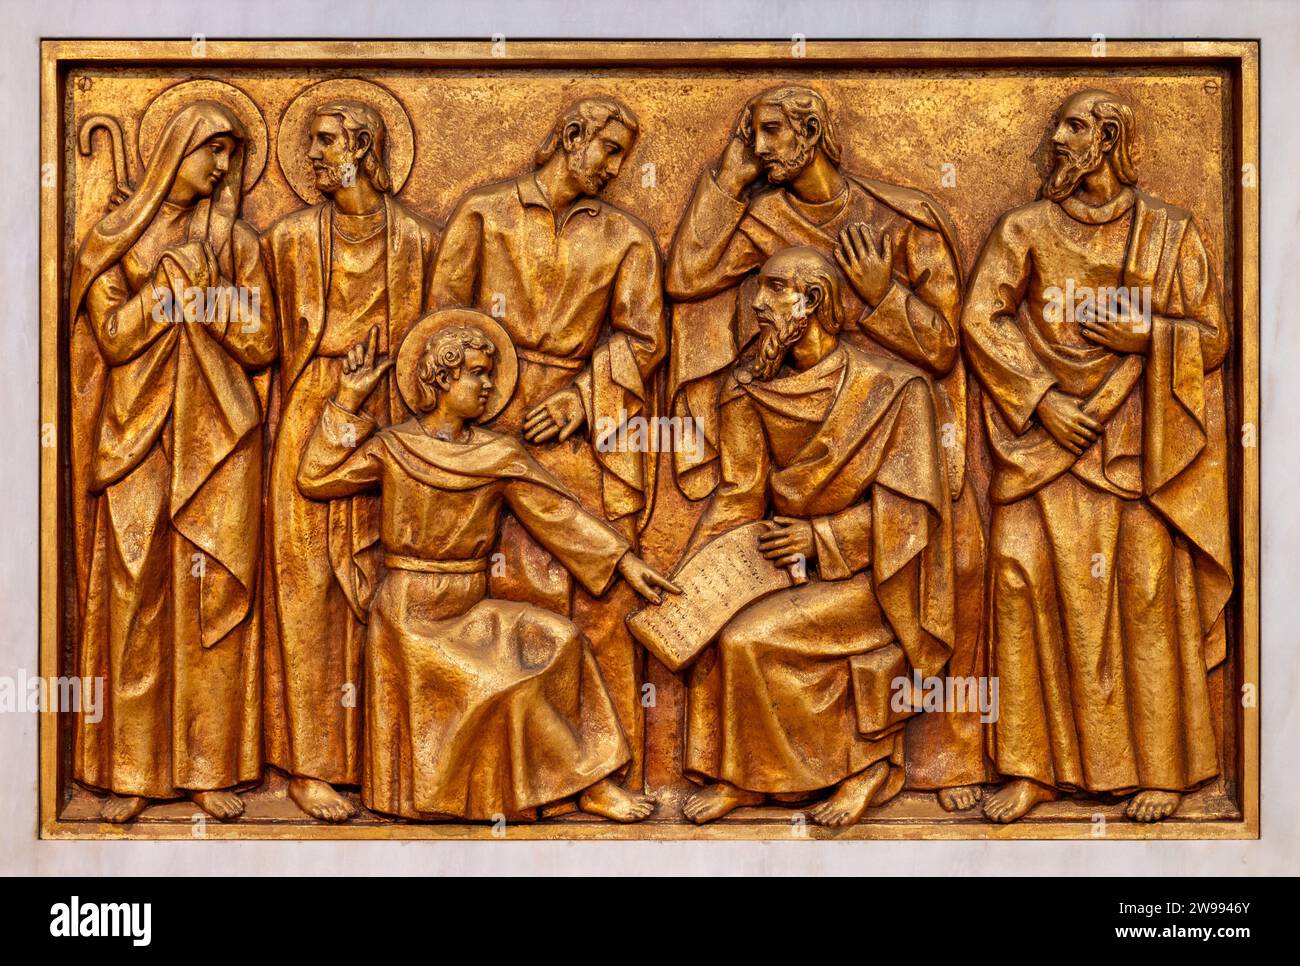 The Finding of Jesus in the Temple – Fifth Joyous Mystery. A relief sculpture in the Basilica of Our Lady of the Rosary of Fatima in Fatima, Portugal. Stock Photo